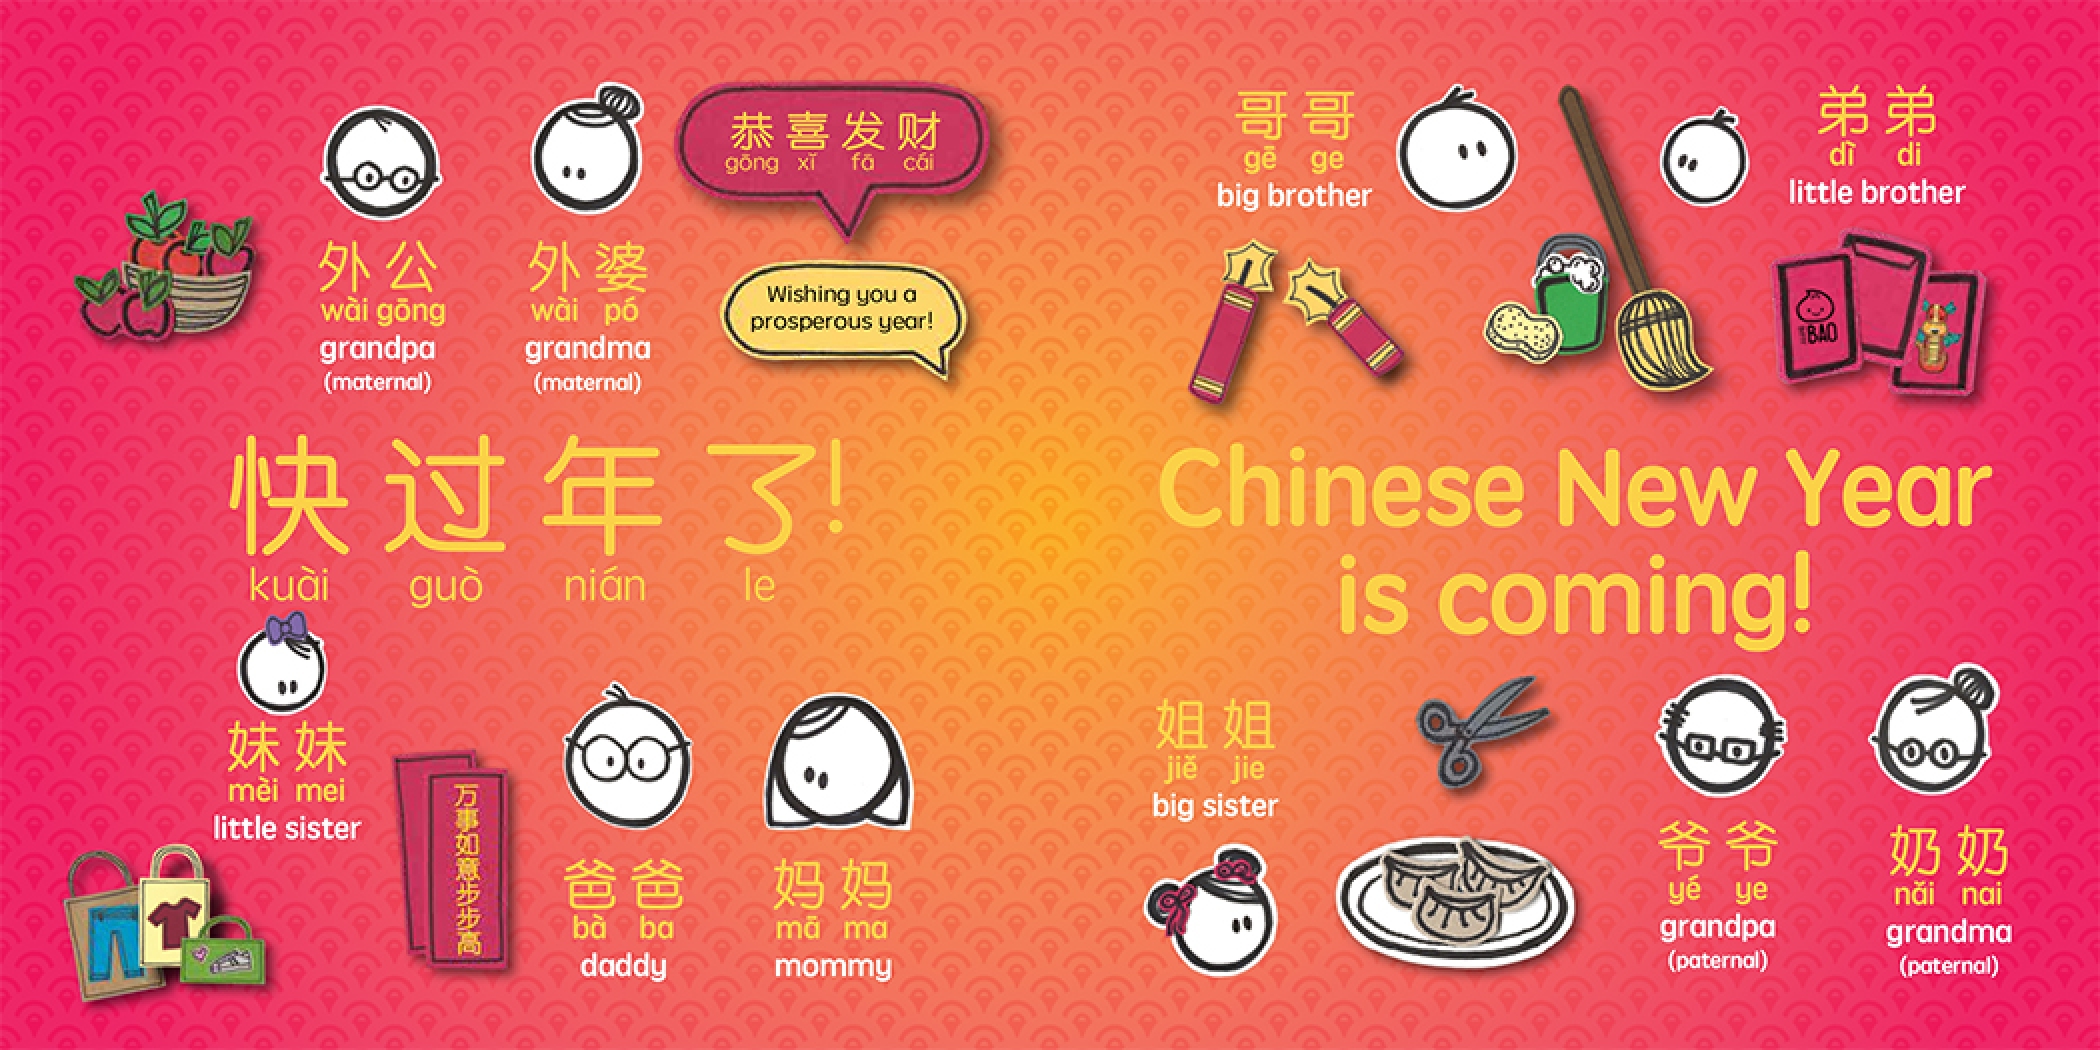 Celebrating Chinese New Year - Simplified